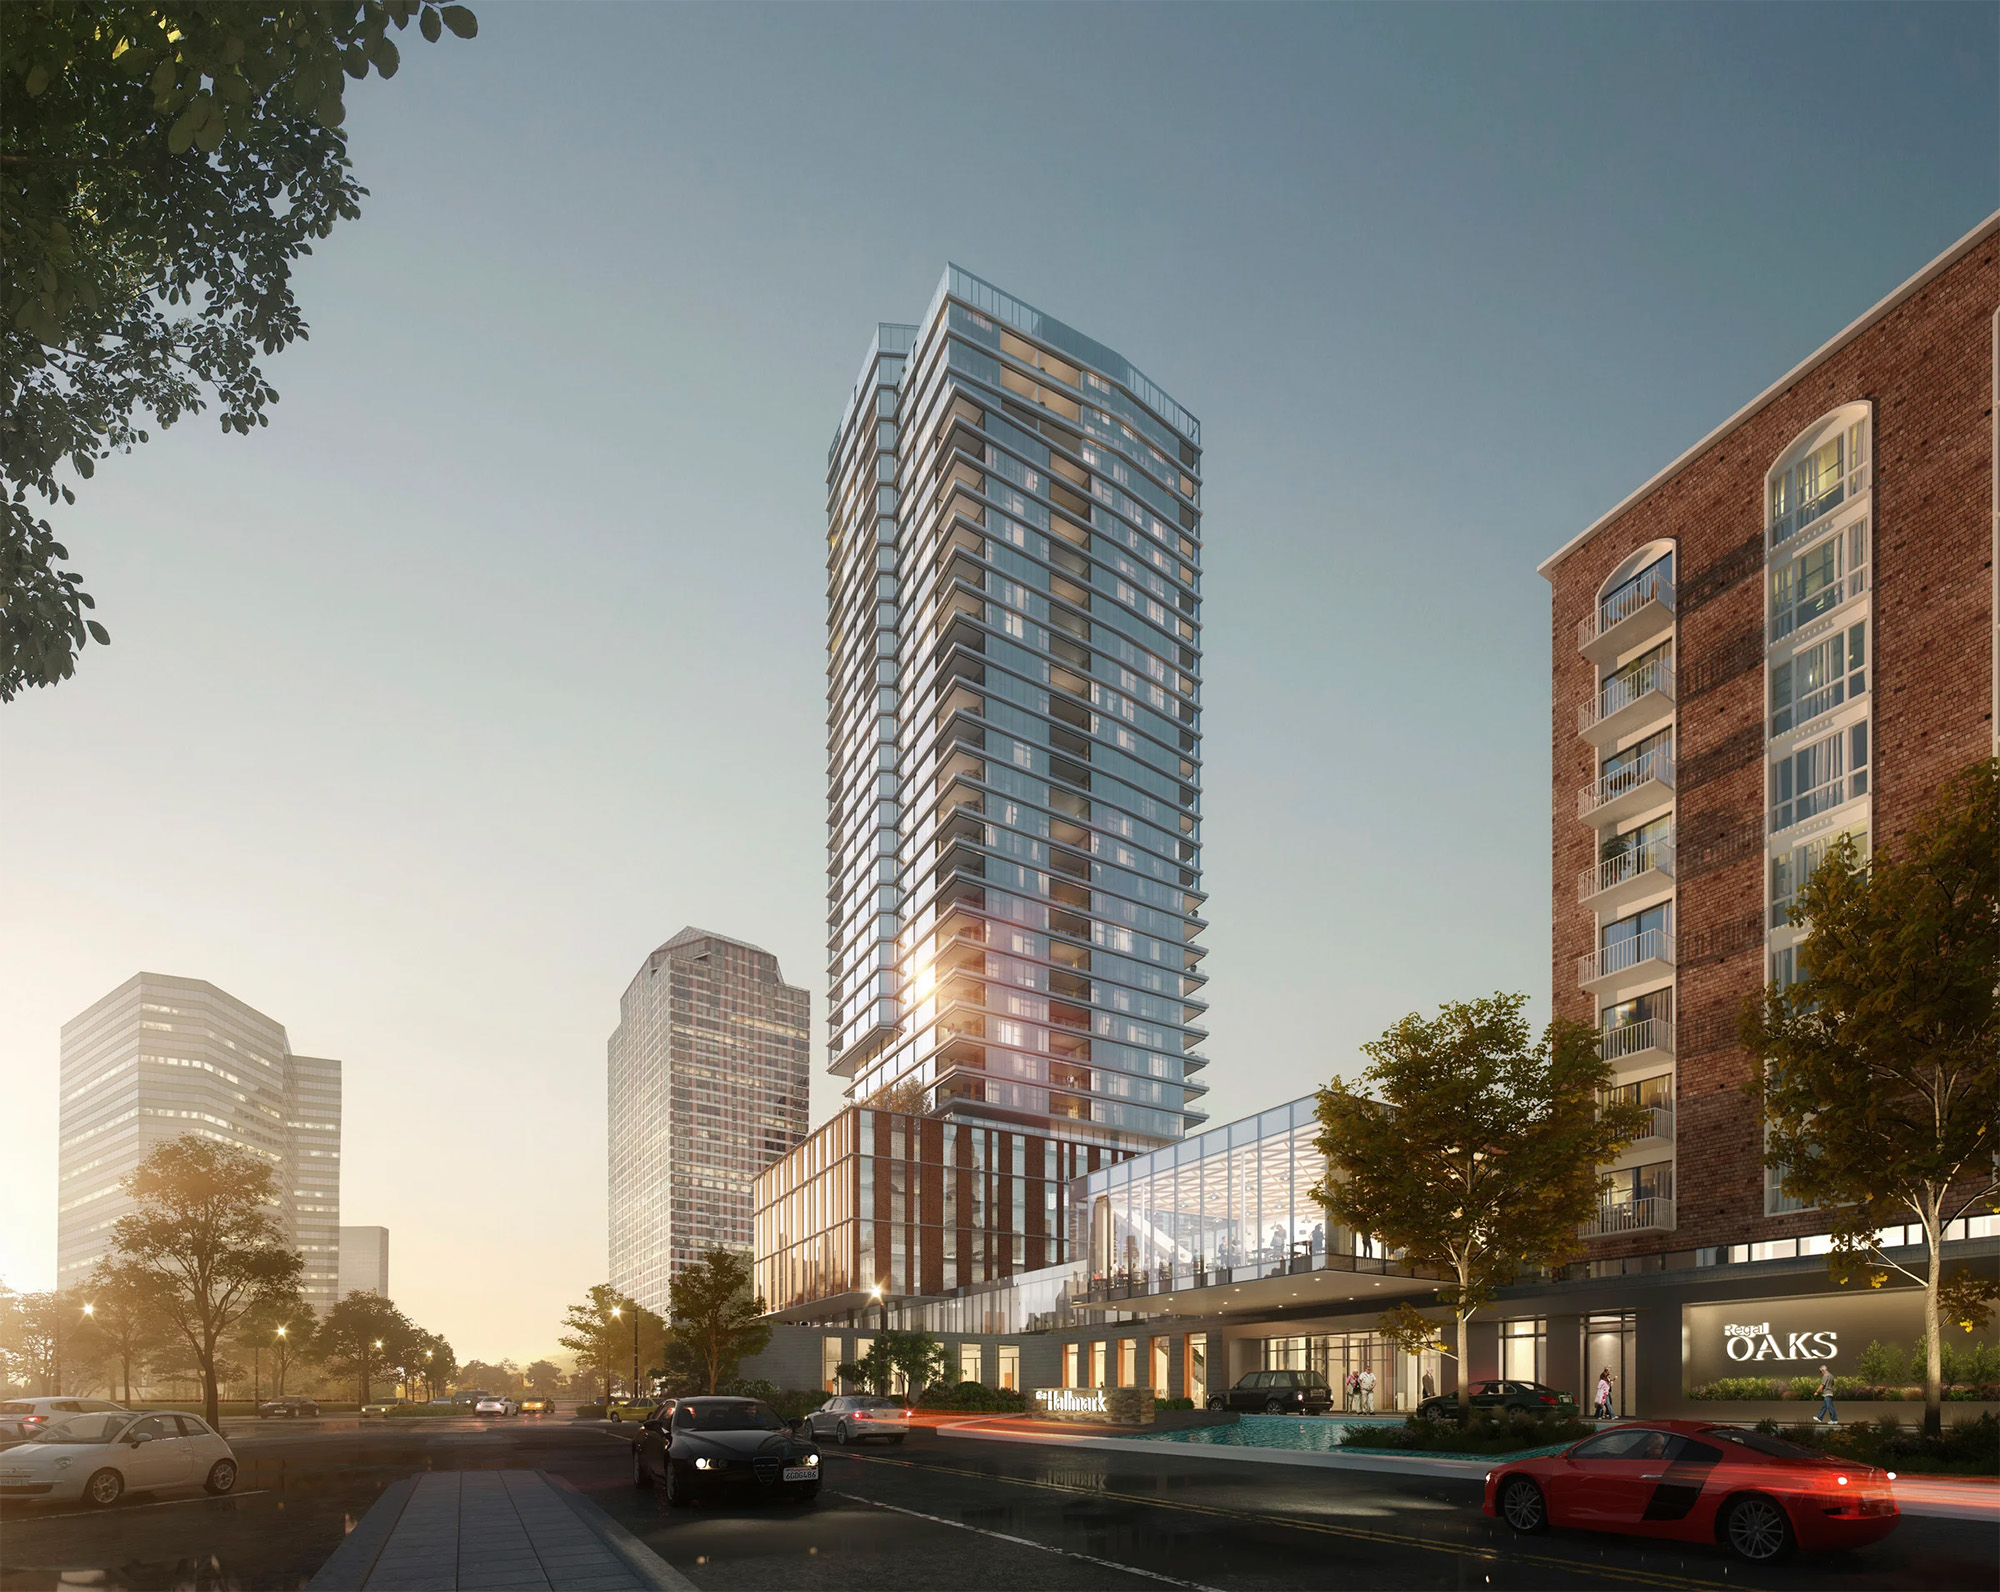 A new connector between Uptown Oaks’ existing building, right, and the new independent-living tower will provide a grand new “front door” to the entire community in downtown Houston, TX. 